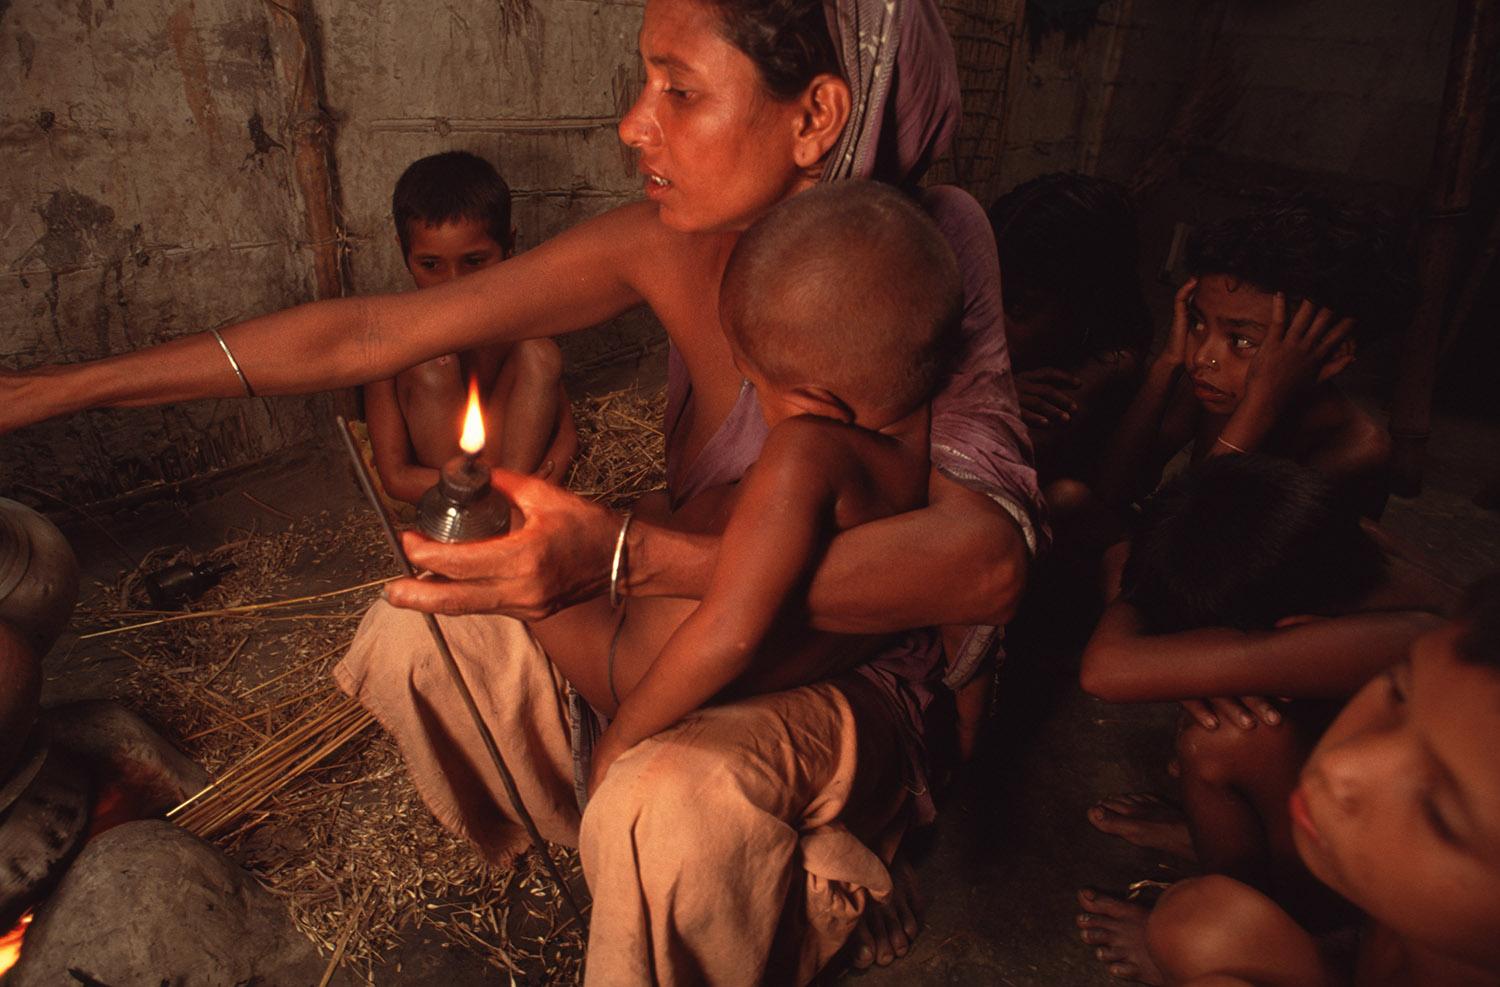 A widow cooks dinner for her many children in her one-room house. This is the main and often only meal of the day for this impoverished family.